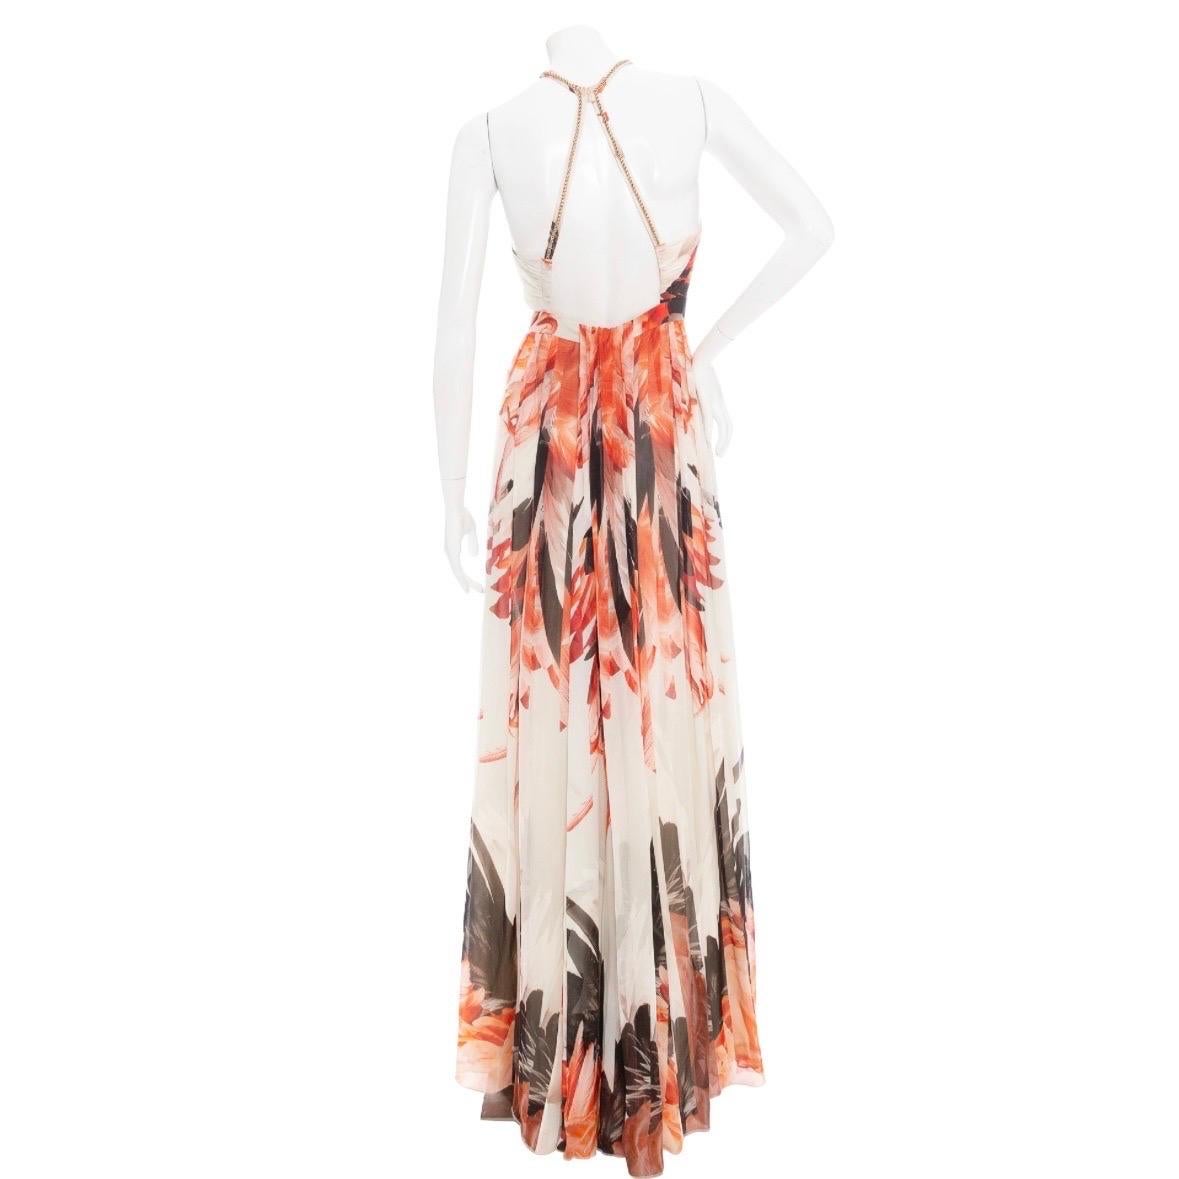 Roberto Cavalli Off White Silk Feather-Print Halter-Neck Maxi Dress

Spring2014
Ivory/Red/Pink/Orange/Black
Abstract feather print
Halter neckline with front keyhole
Racer back straps with button fastening
Snake chain trim along neck and back